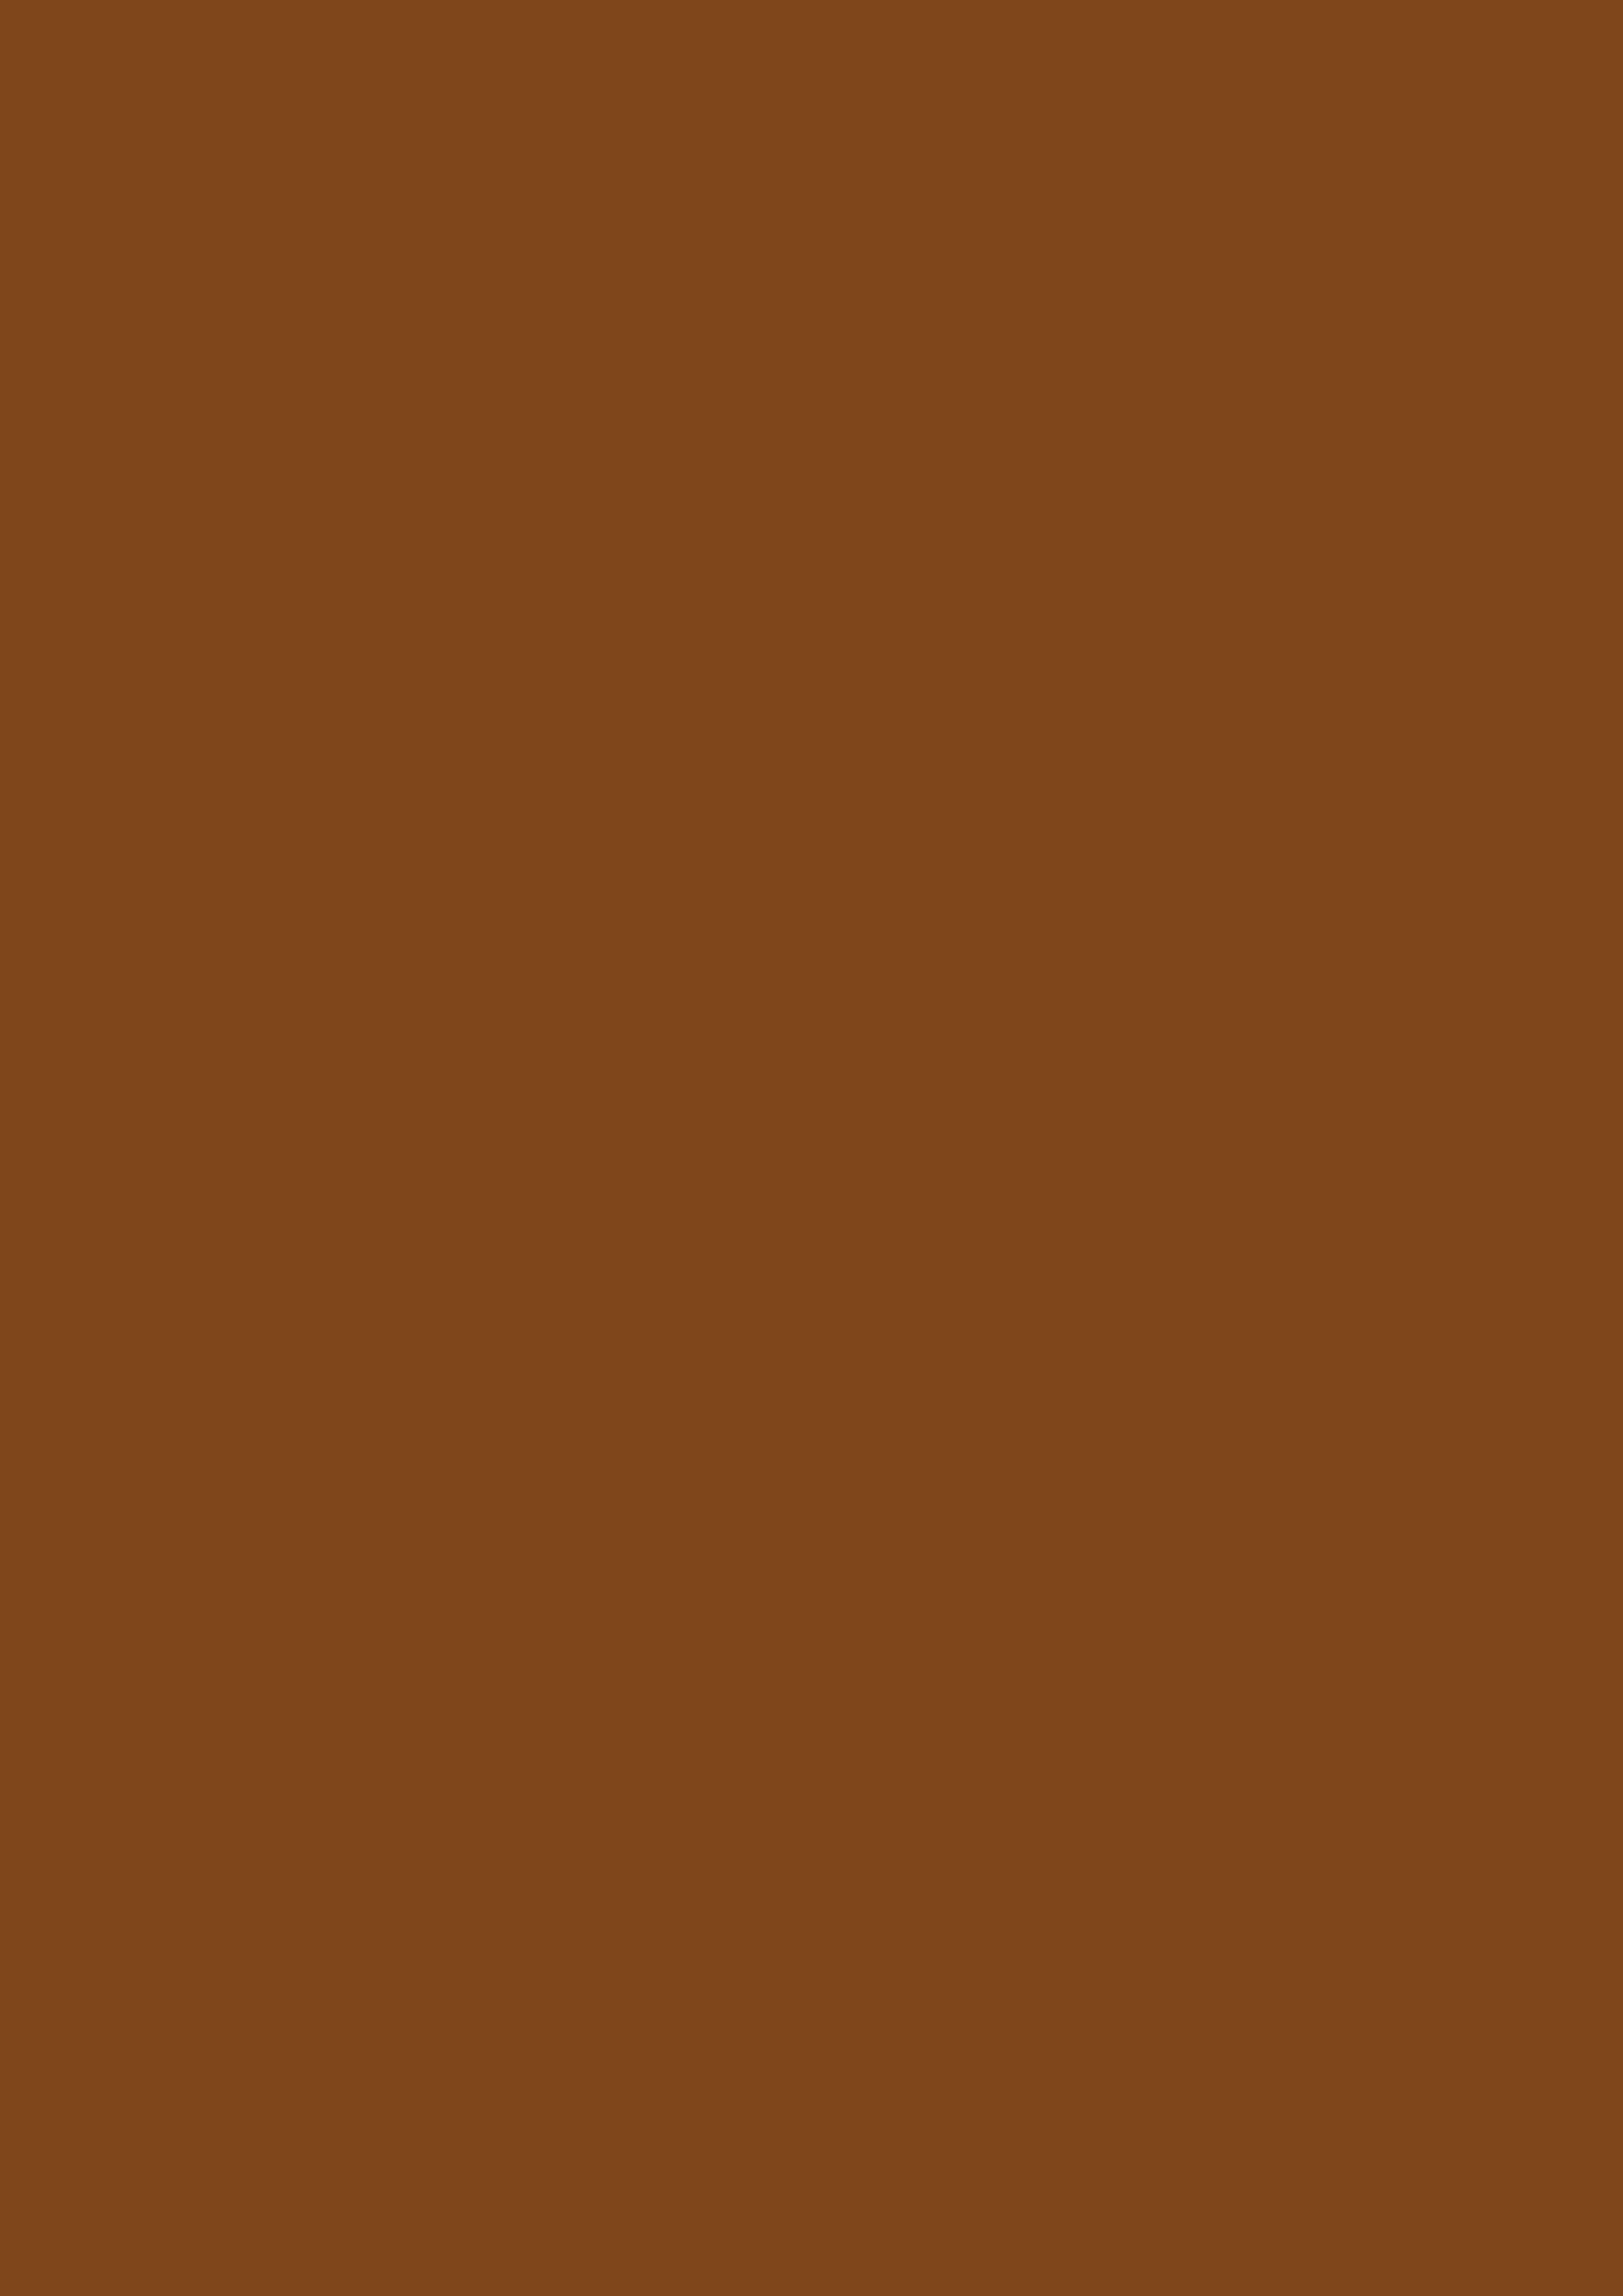 2480x3508 Russet Solid Color Background